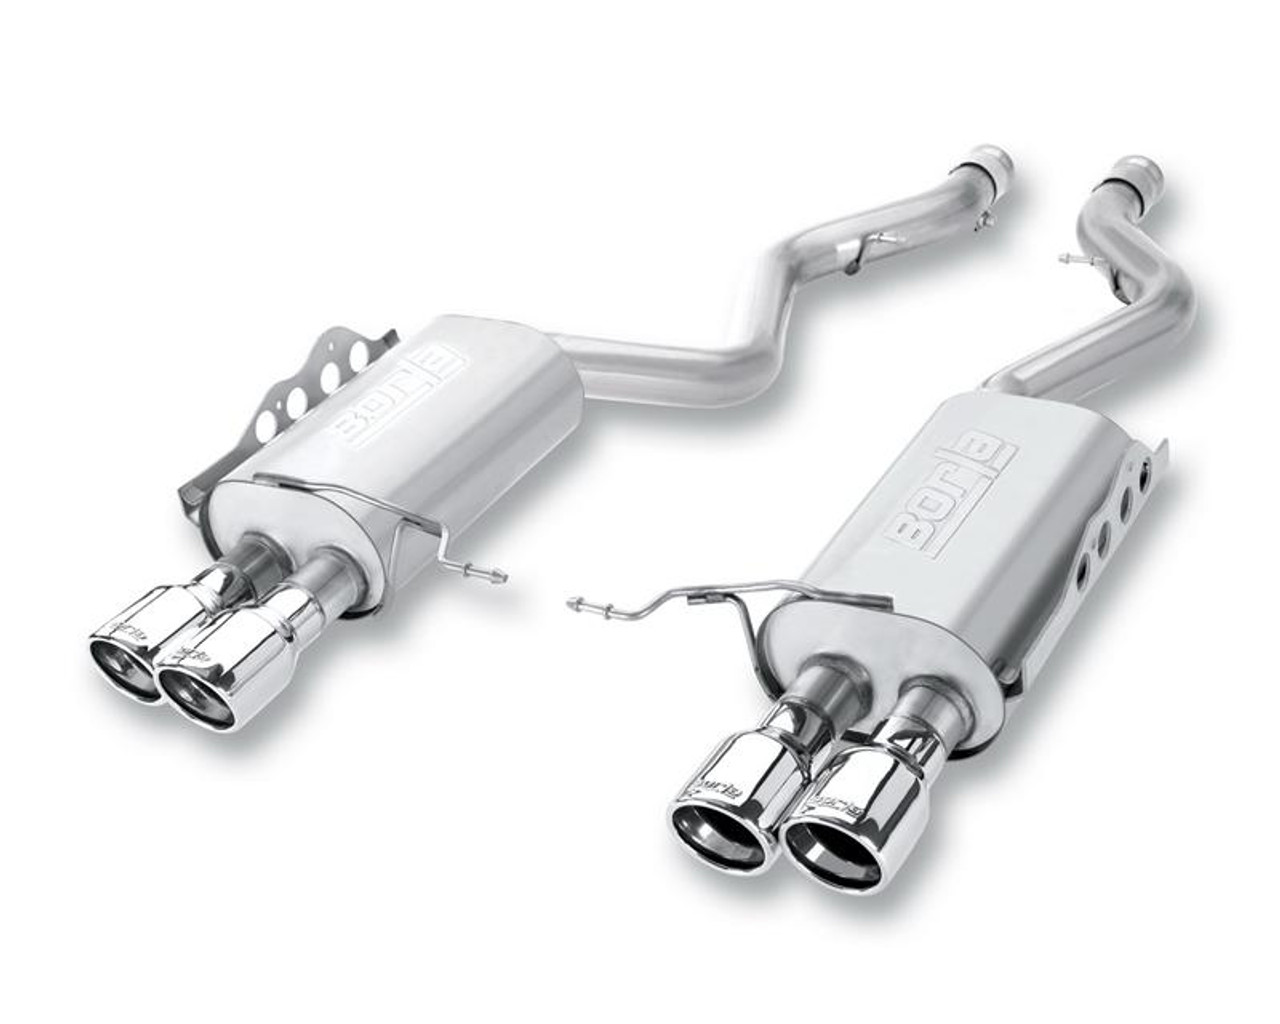 Borla S-Type Cat-Back Exhaust System - 2.5 in. - Incl. Pipe